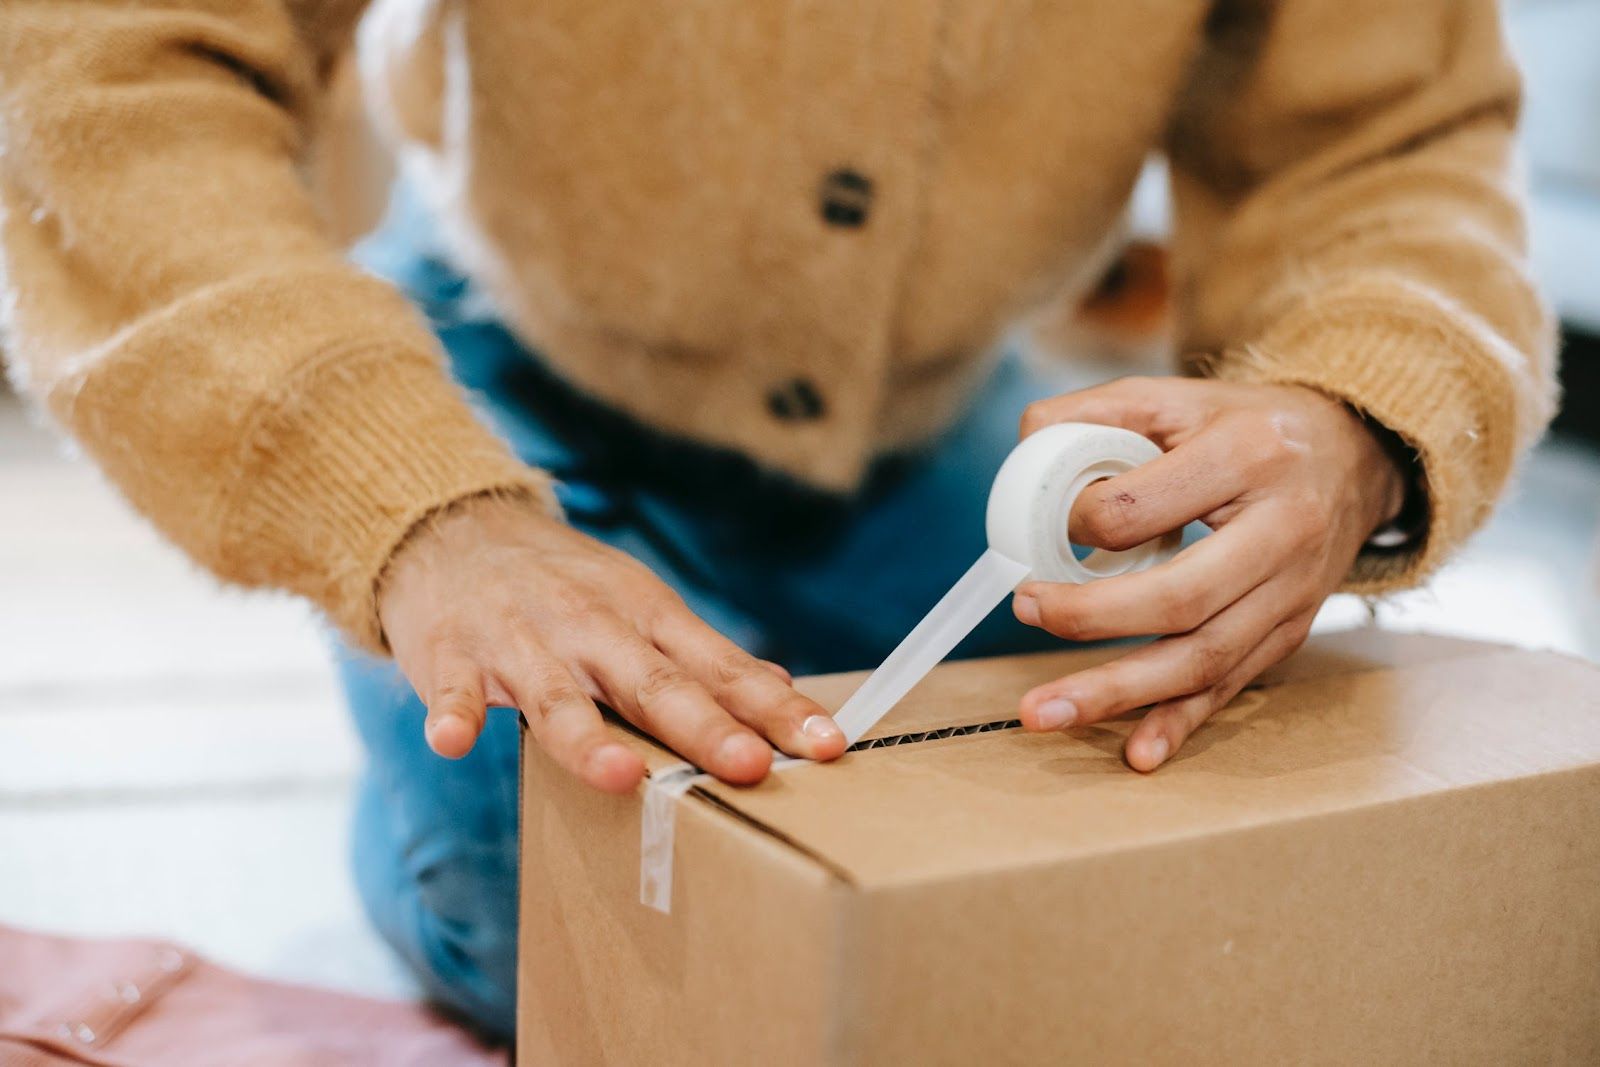 Cheapest Way to Ship a Big Box of Clothes: Cost-Saving Packaging